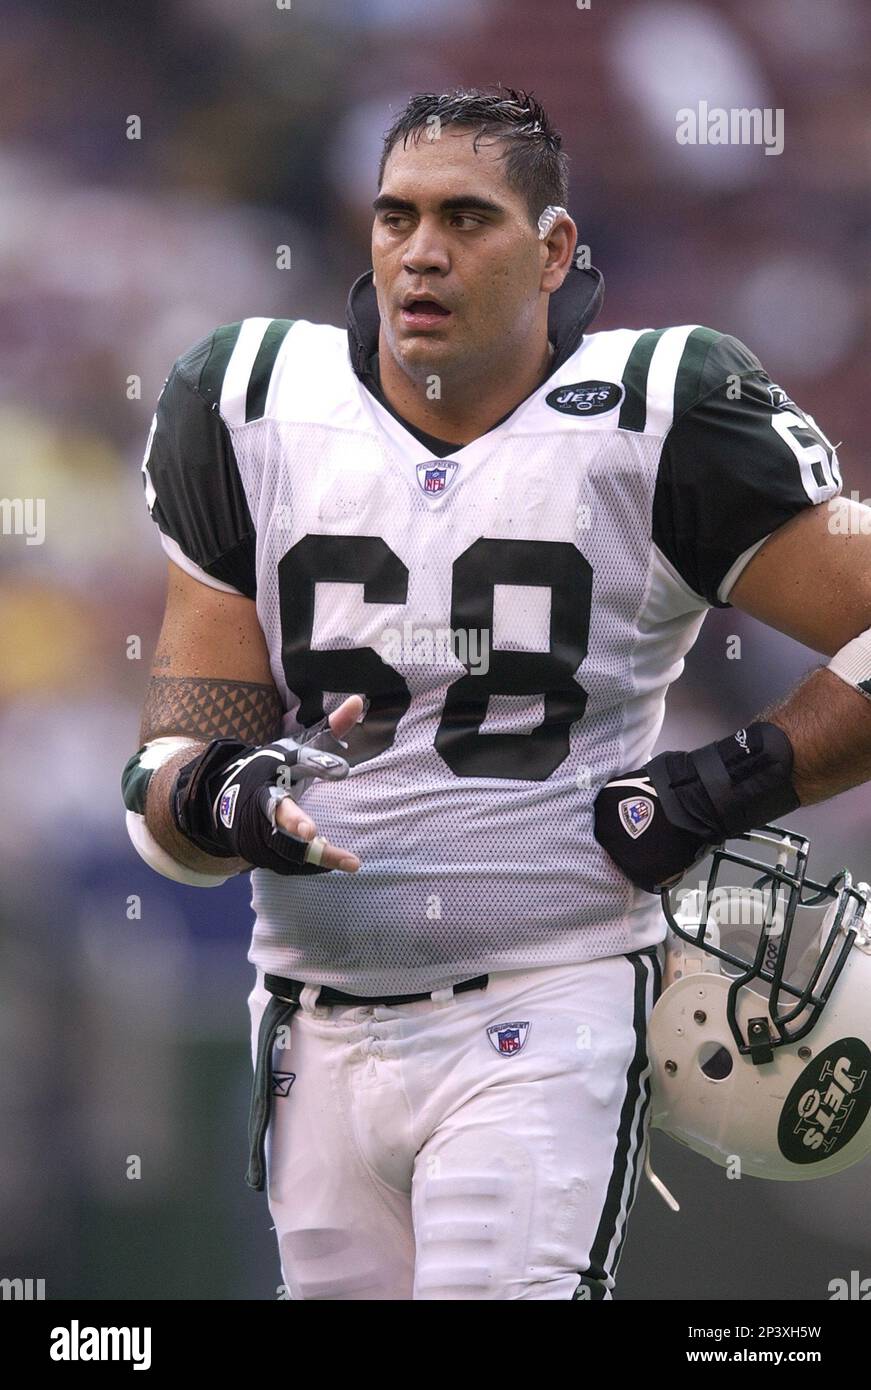 10 August 2003: Kevin Mawae of the New York Jets during the Jets 28-13  preseason victory over the Cincinnati Bengals at the Meadowlands in East  Rutherford, New Jersey. (Icon Sportswire via AP